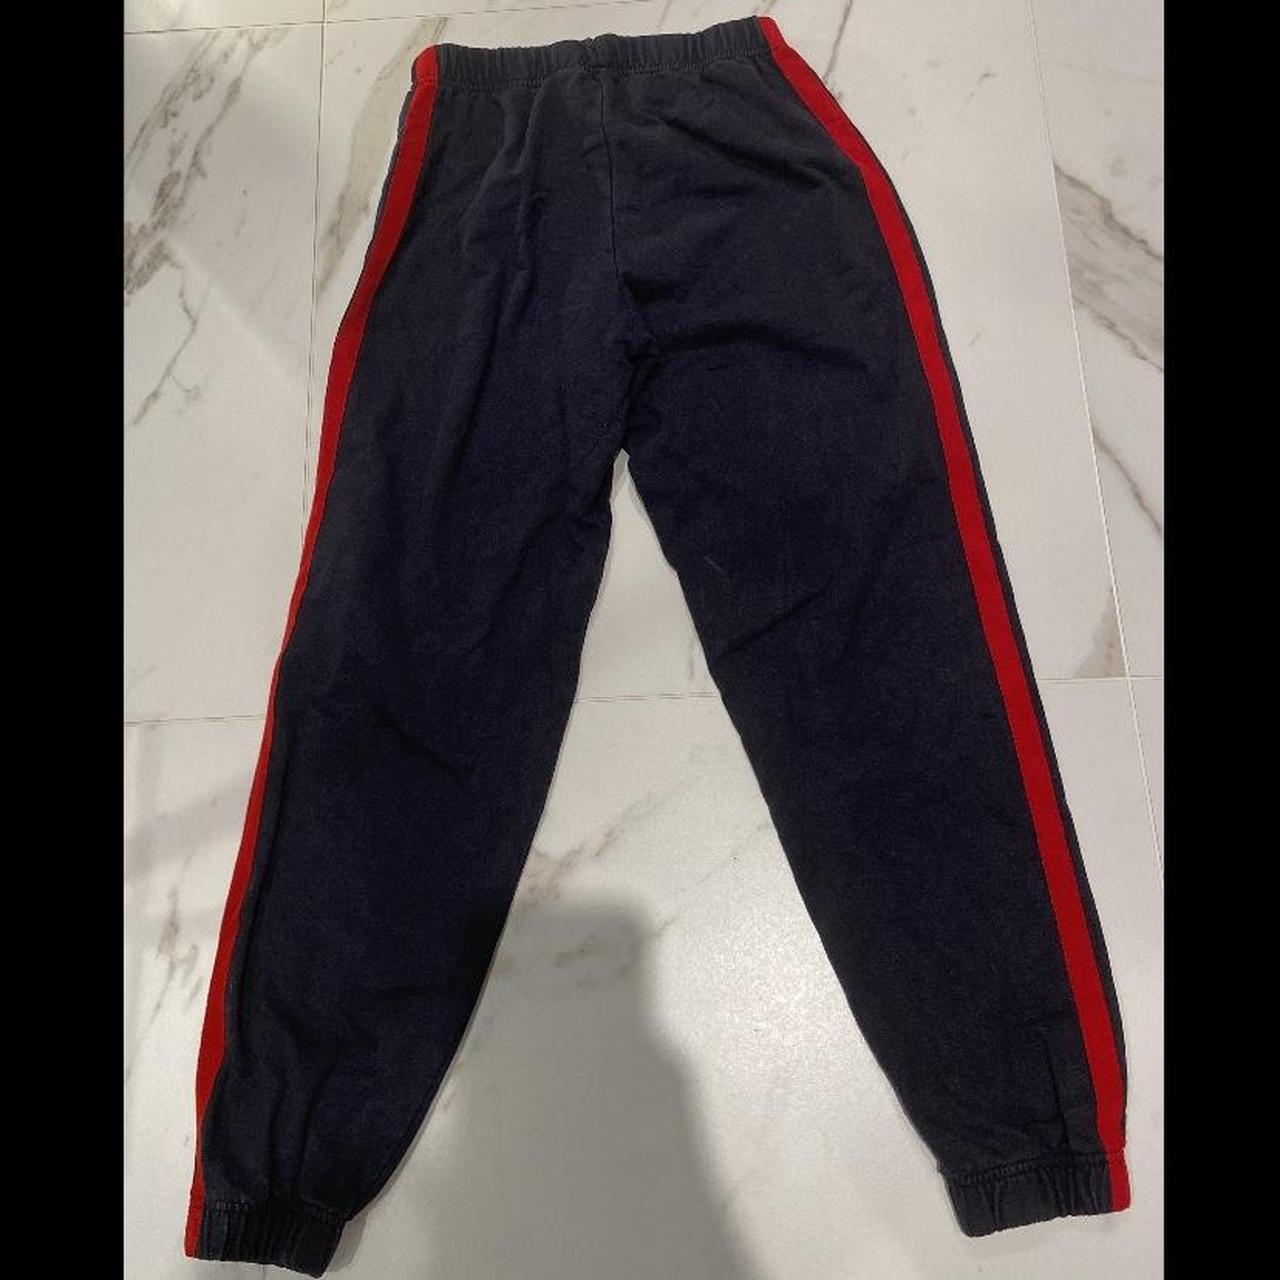 Brandy Melville Women's Navy and Red Joggers-tracksuits | Depop